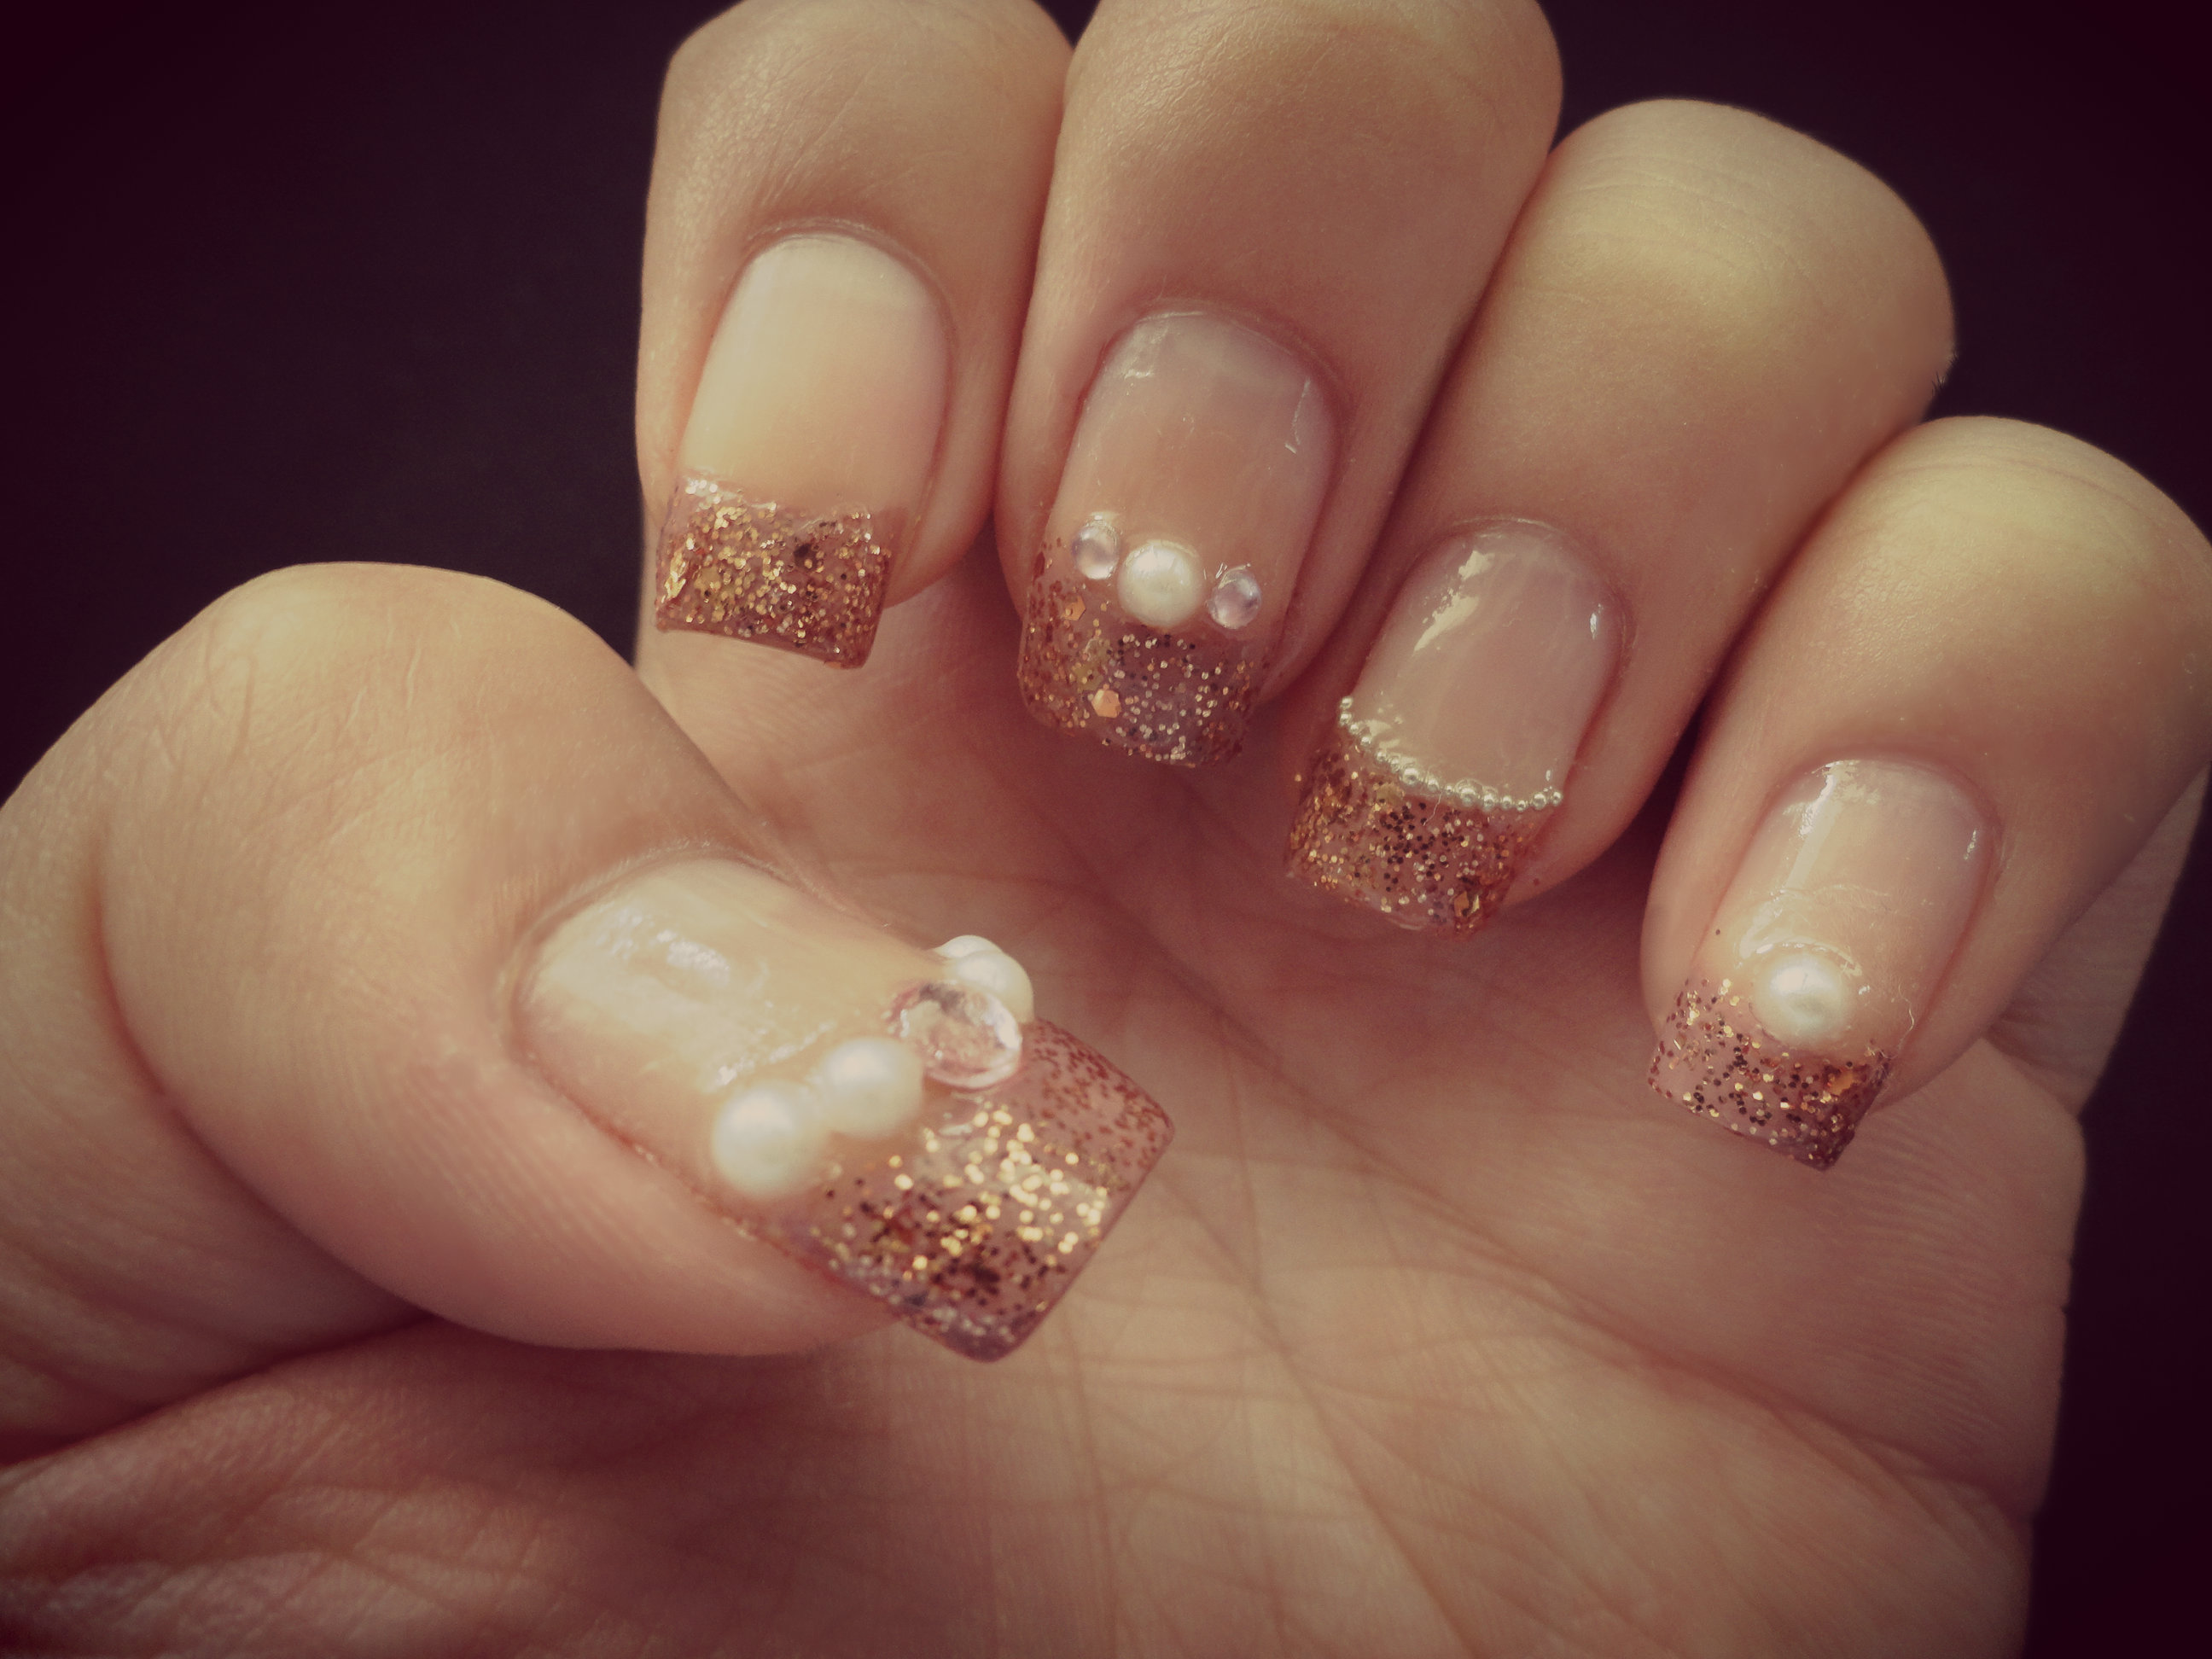 5. Sparkly Gold and White French Tip Nails for Prom - wide 5